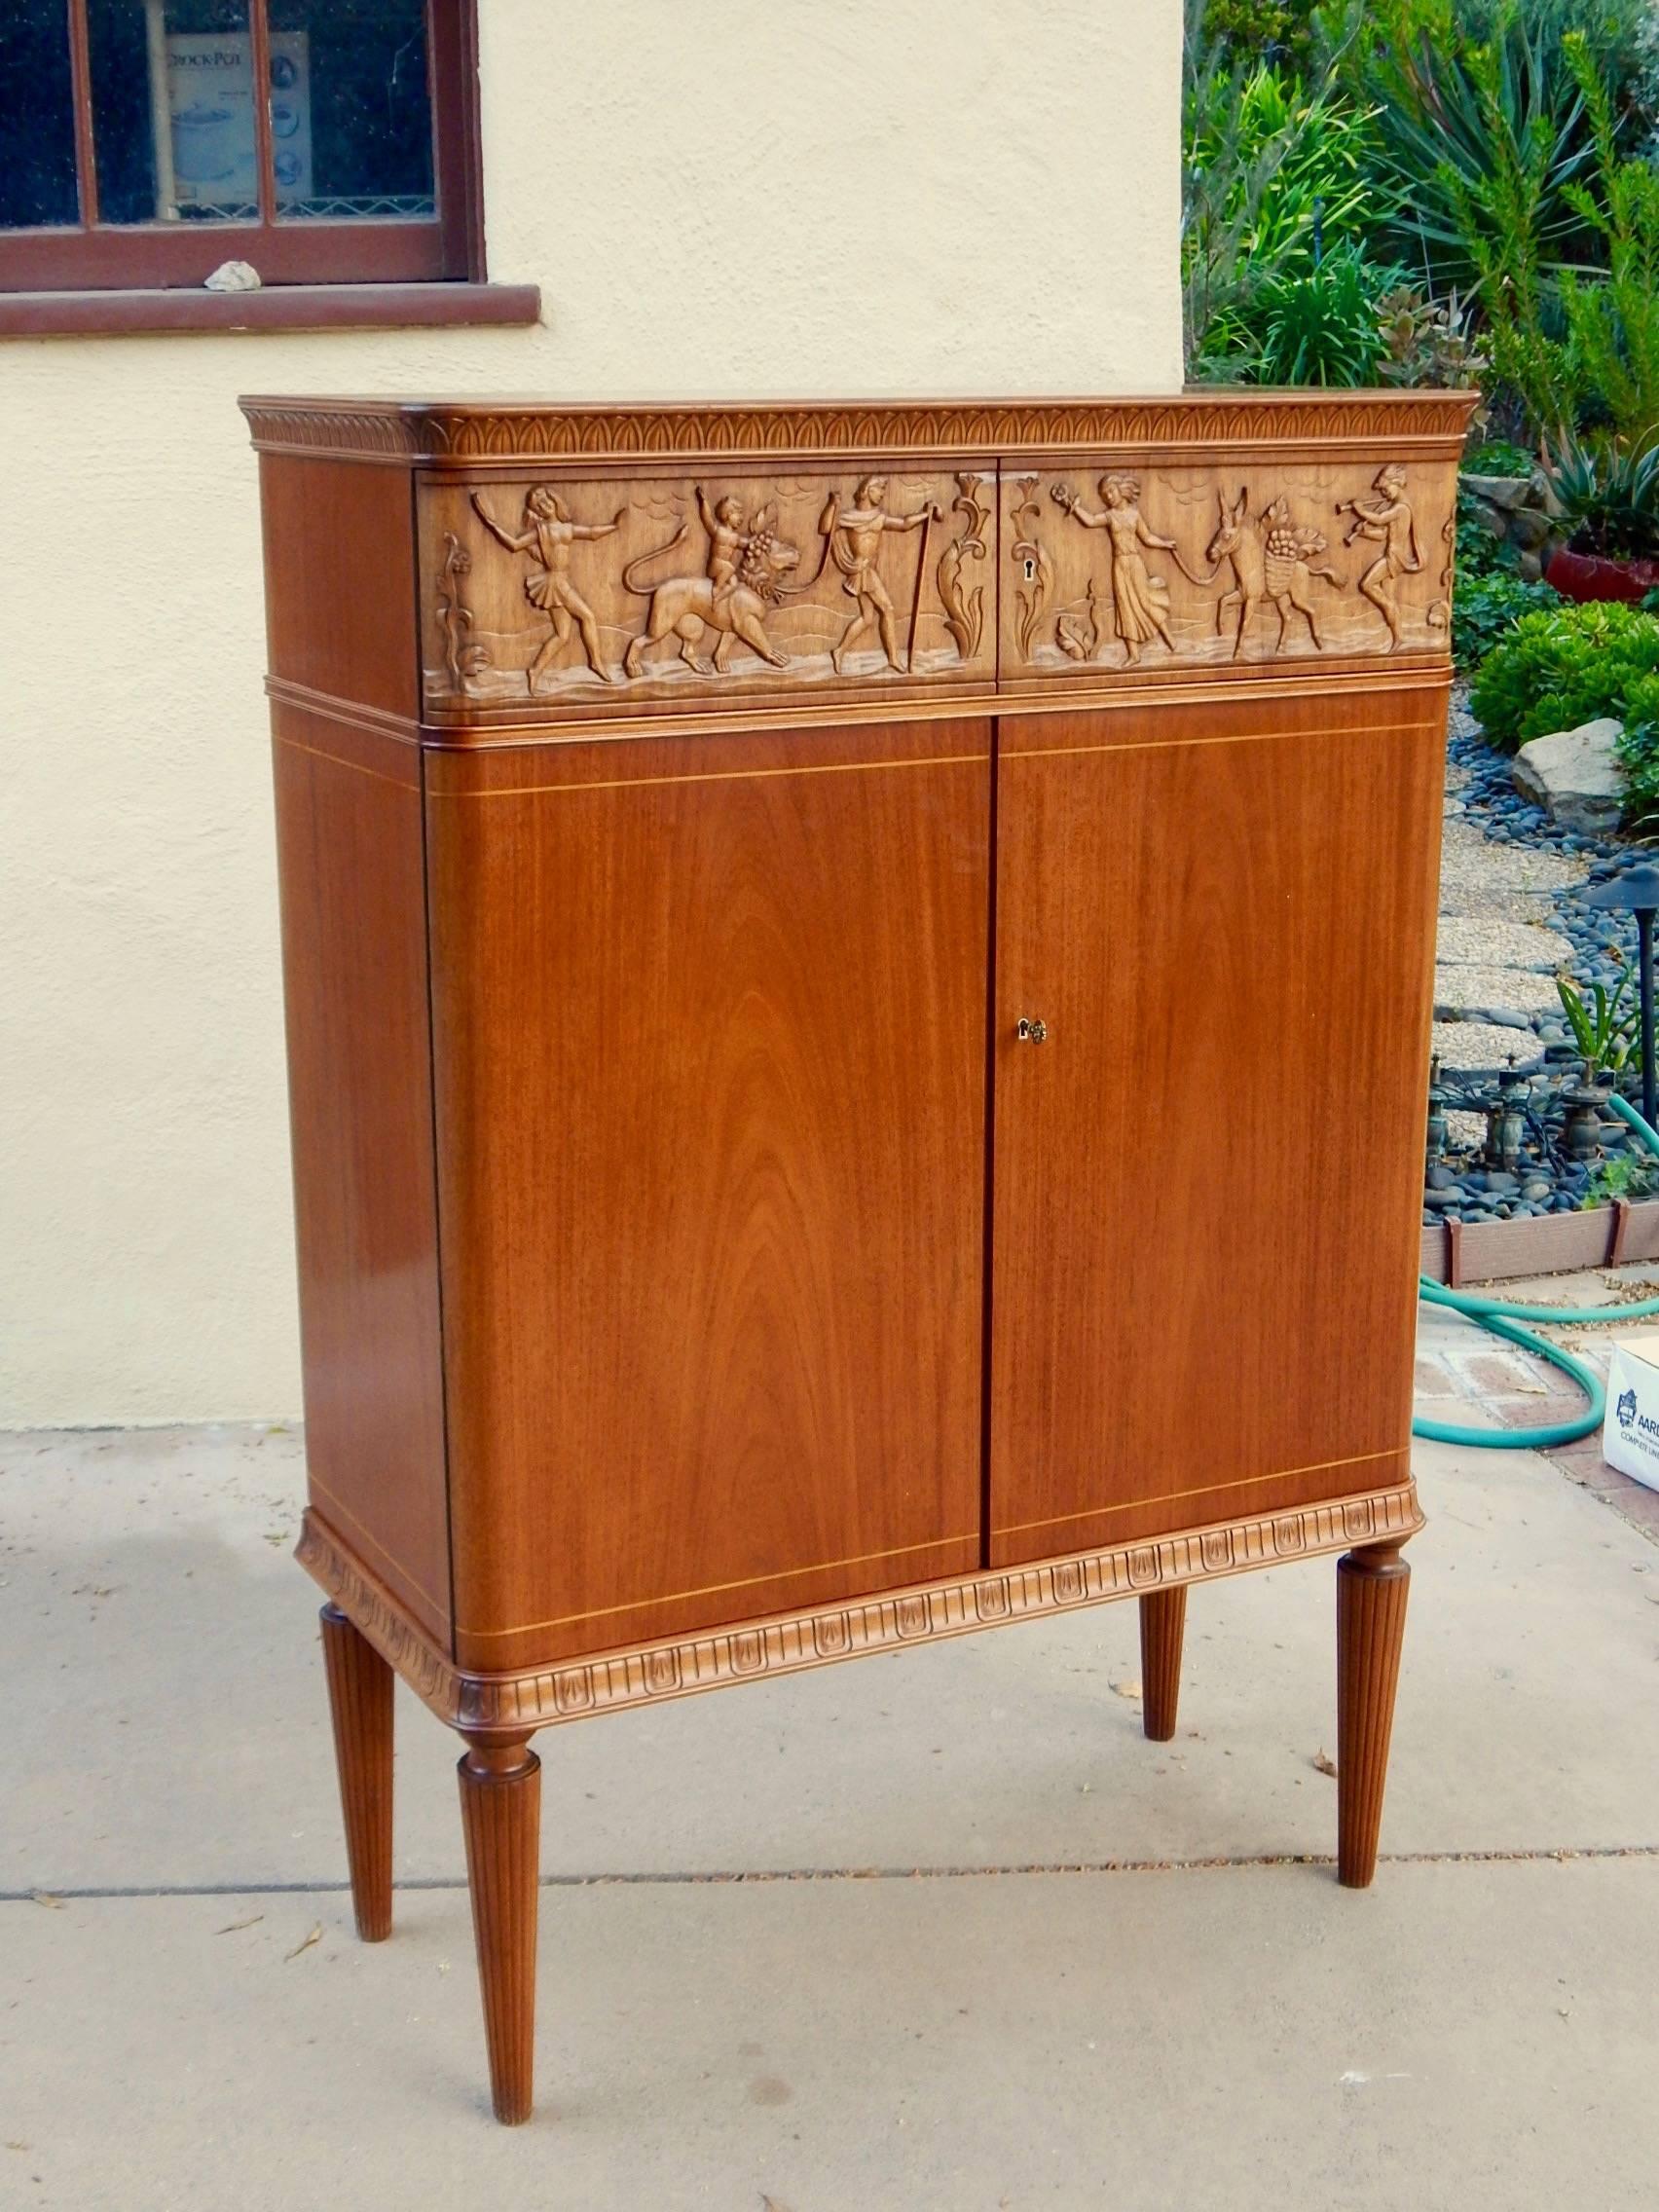 Art Deco Swedish, 1940s Moderne Storage Cabinet with Figural Relief by Eugene Höglund For Sale